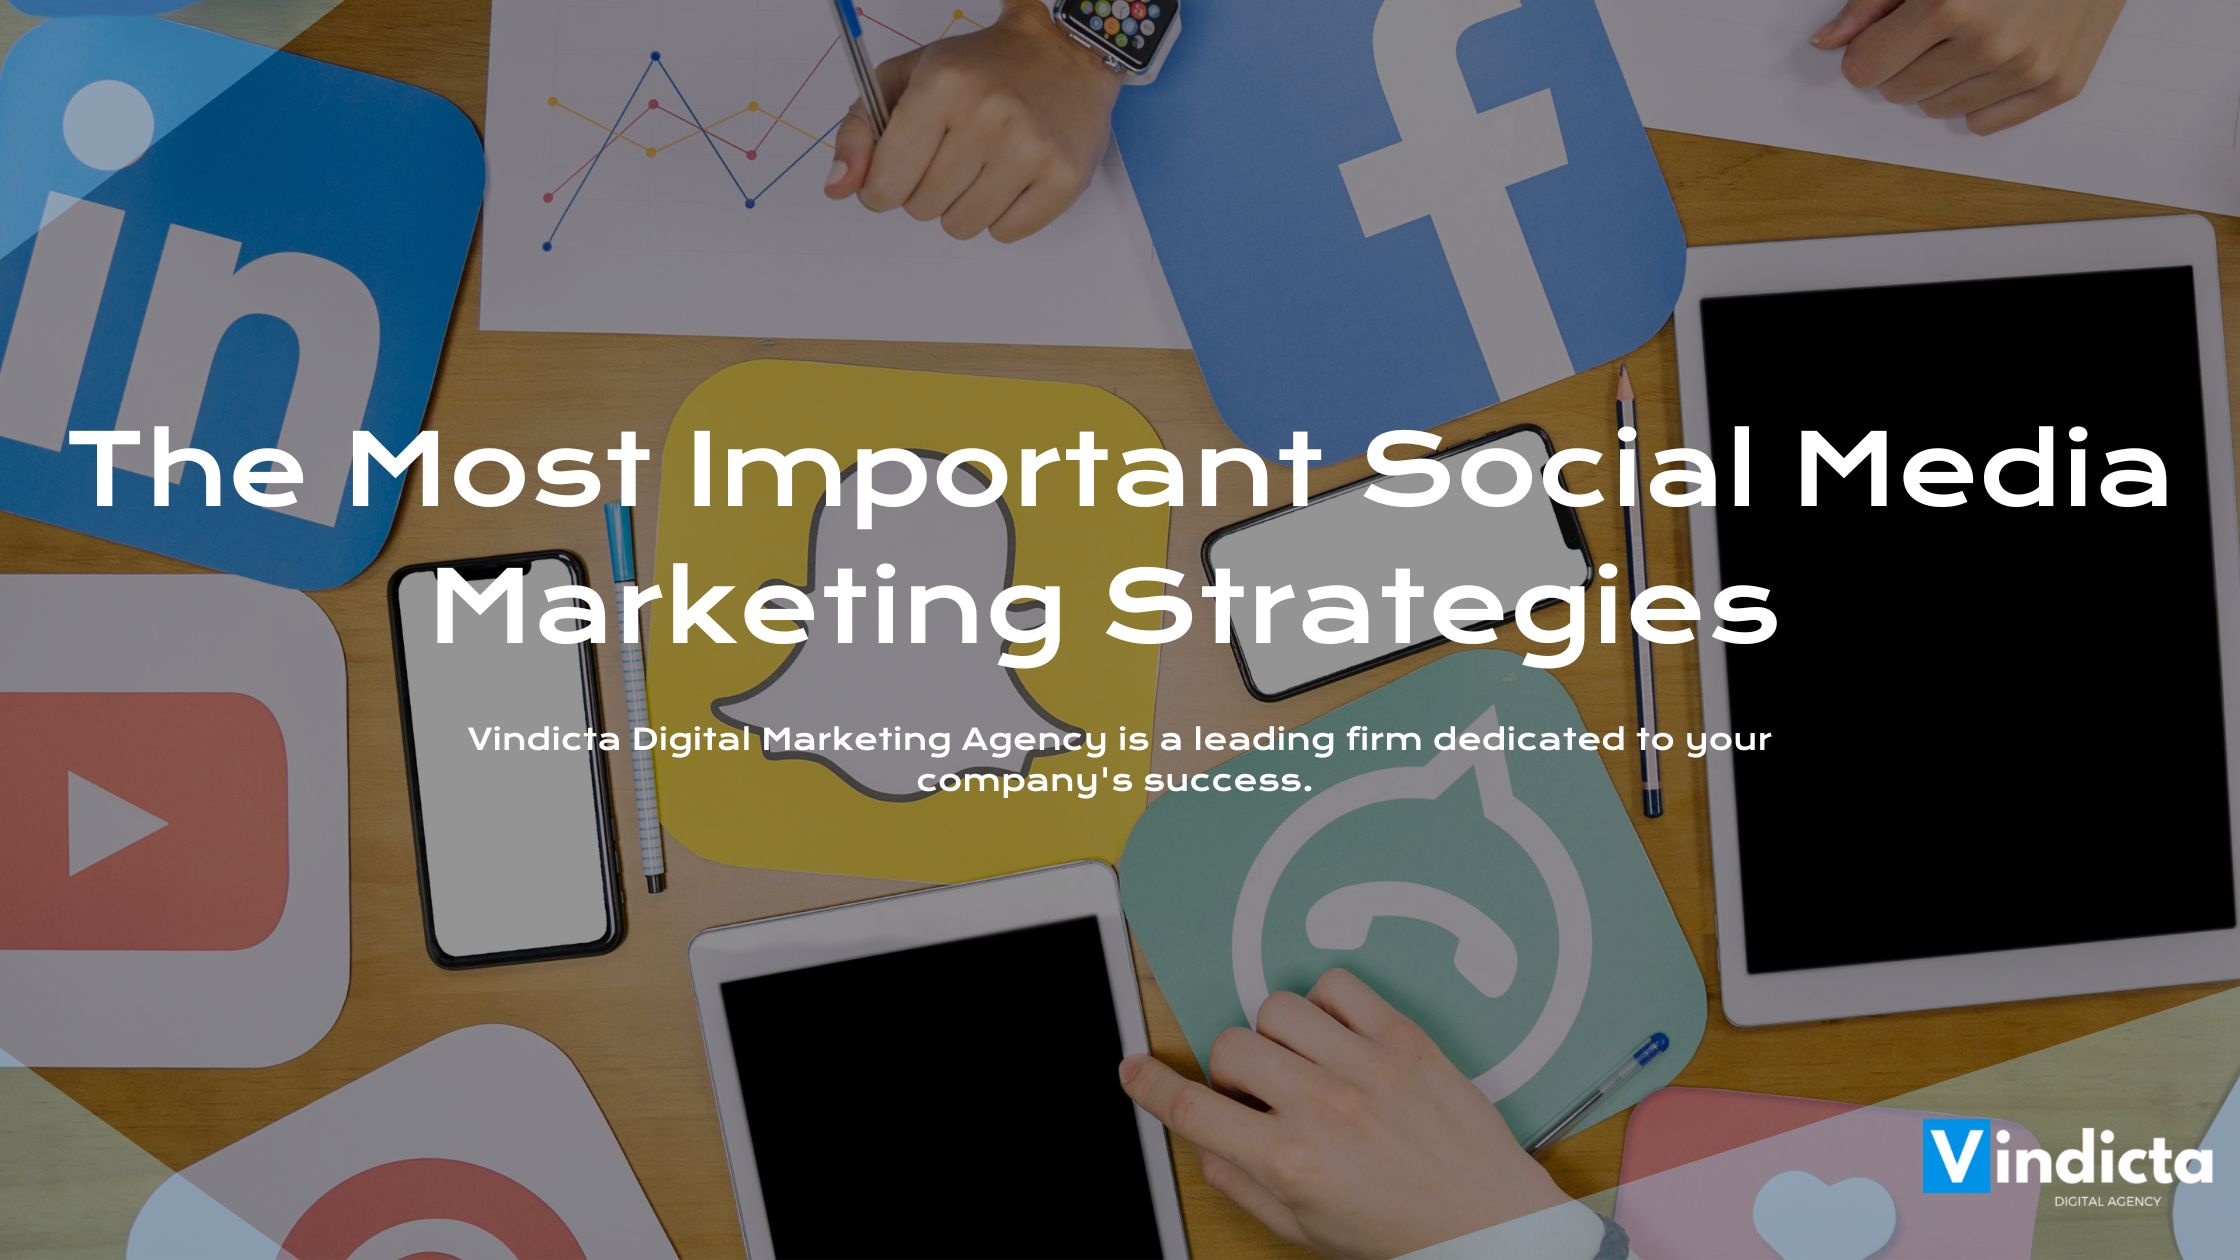 The Most Important Social Media Marketing Strategies for Business Success